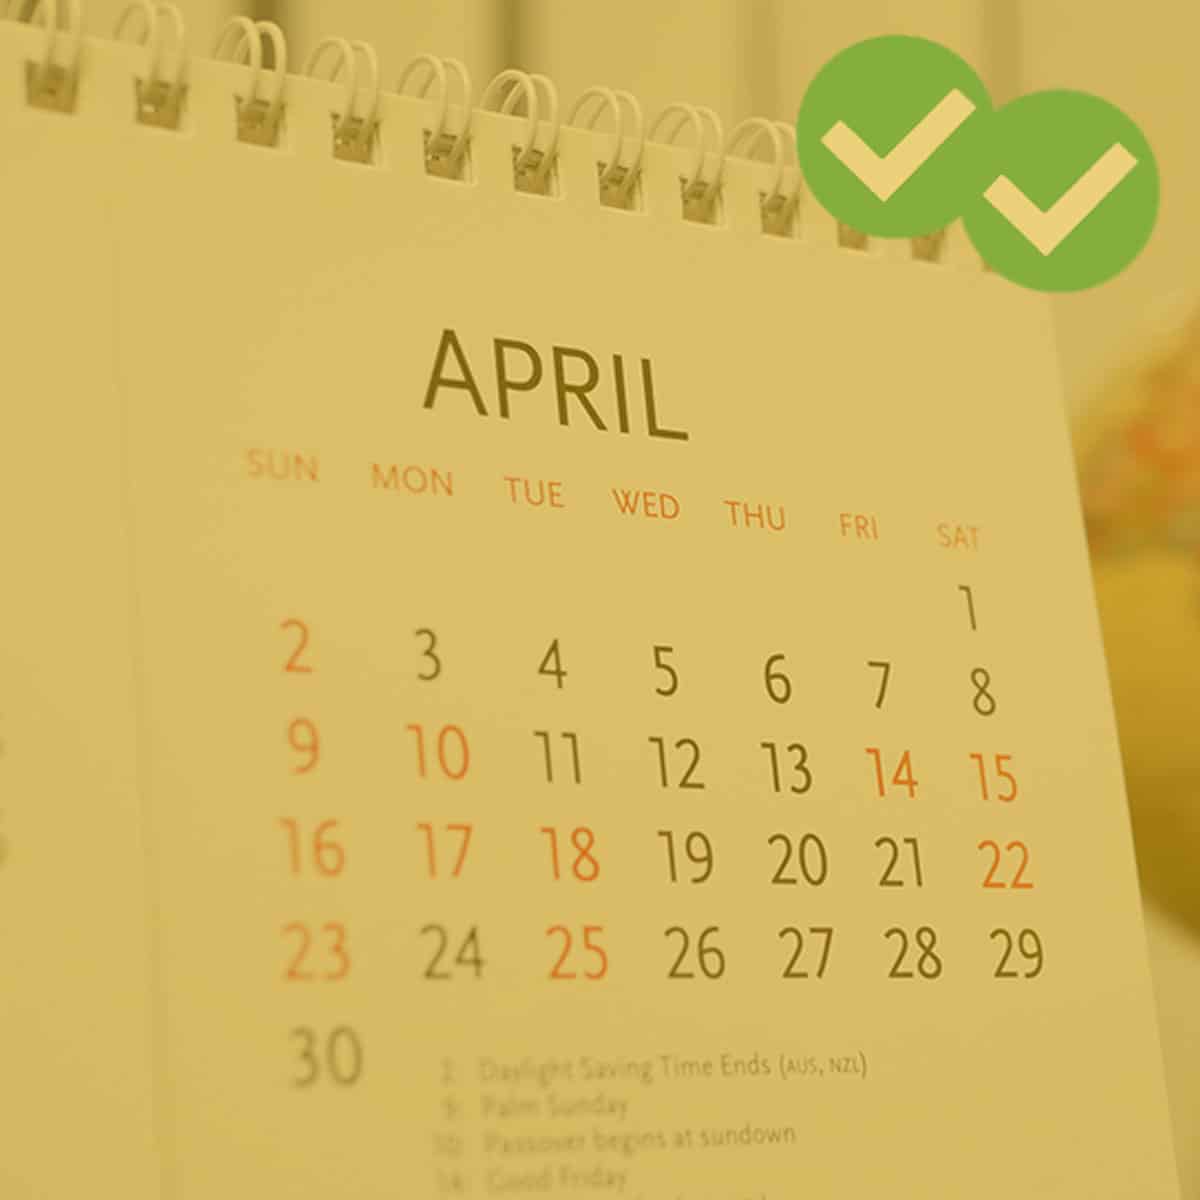 April LSAT: What You Need to Know